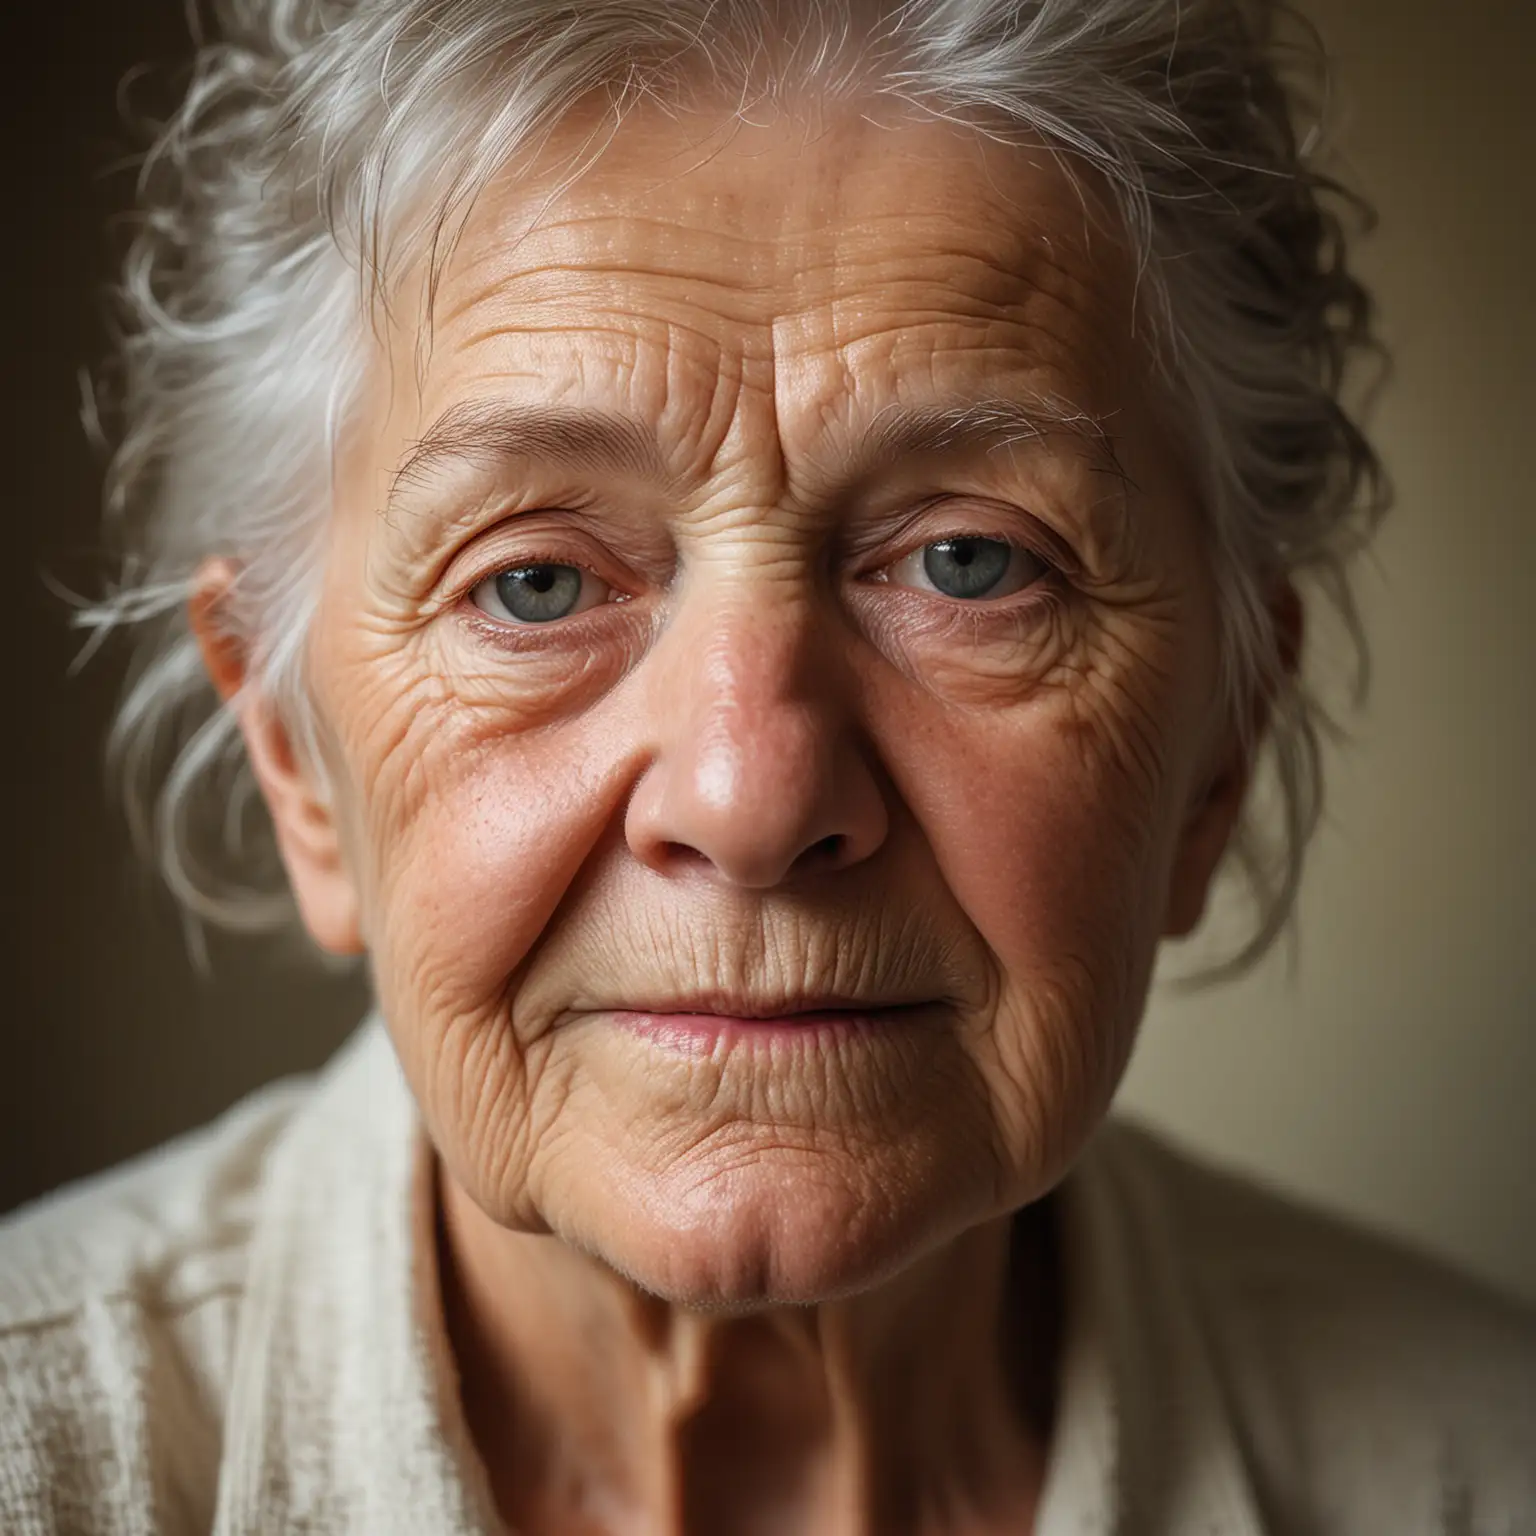 Portraits are about capturing the soul. Natural lighting is key in highlighting the rich textures and stories hidden in the features of an elderly person. Midjourney for making portraits is absolutely stunning.